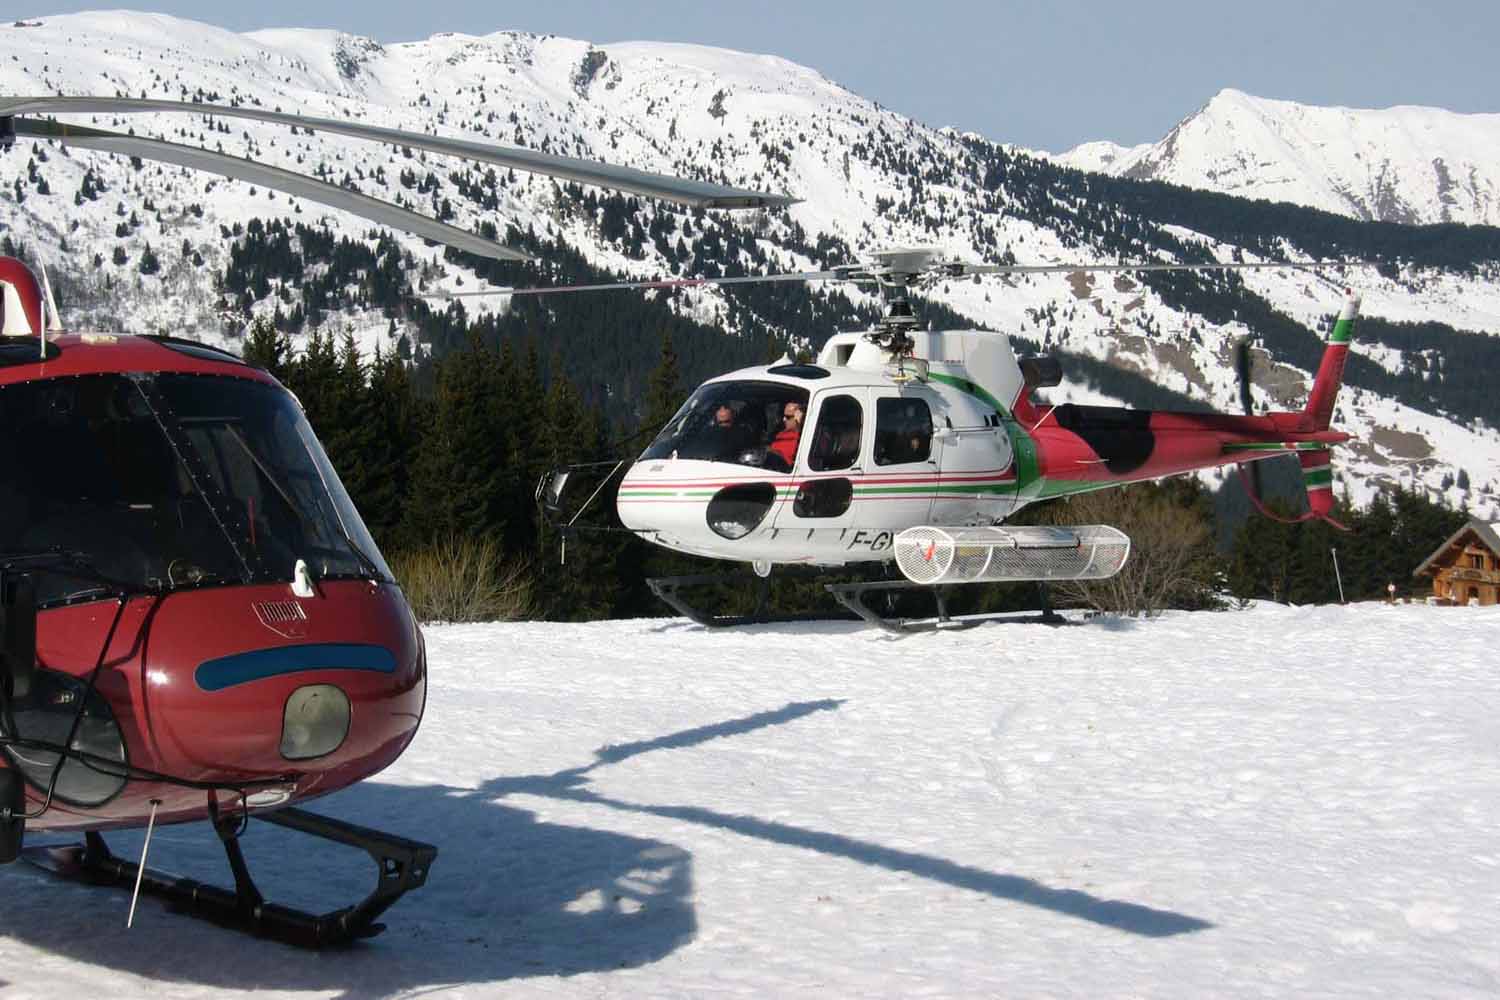 Les-Arcs helicopter charters service